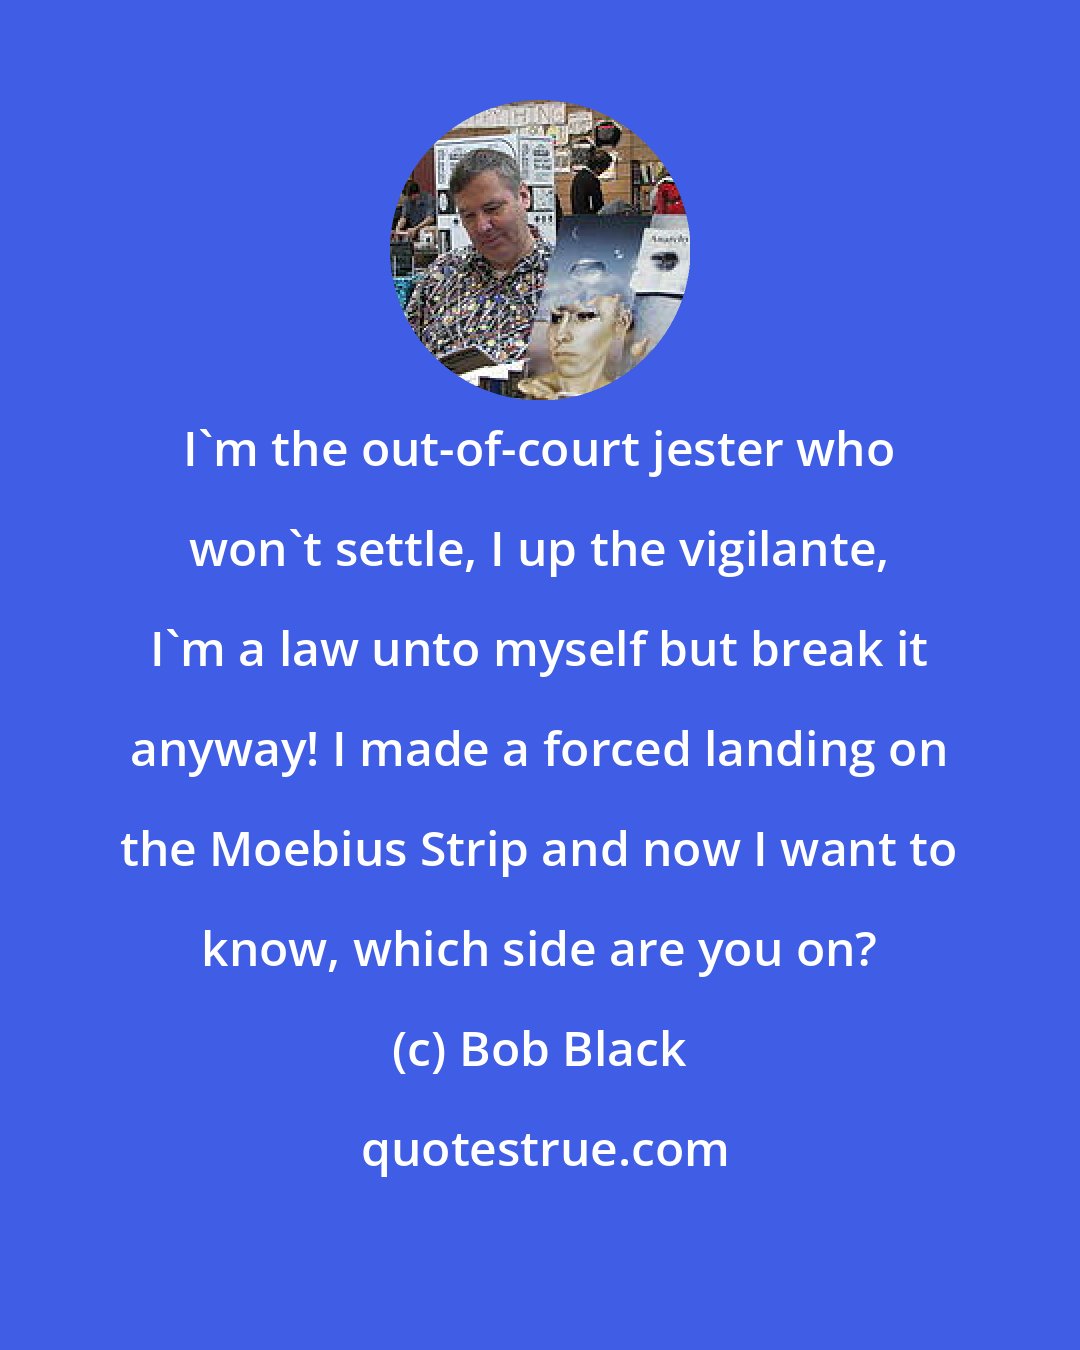 Bob Black: I'm the out-of-court jester who won't settle, I up the vigilante, I'm a law unto myself but break it anyway! I made a forced landing on the Moebius Strip and now I want to know, which side are you on?